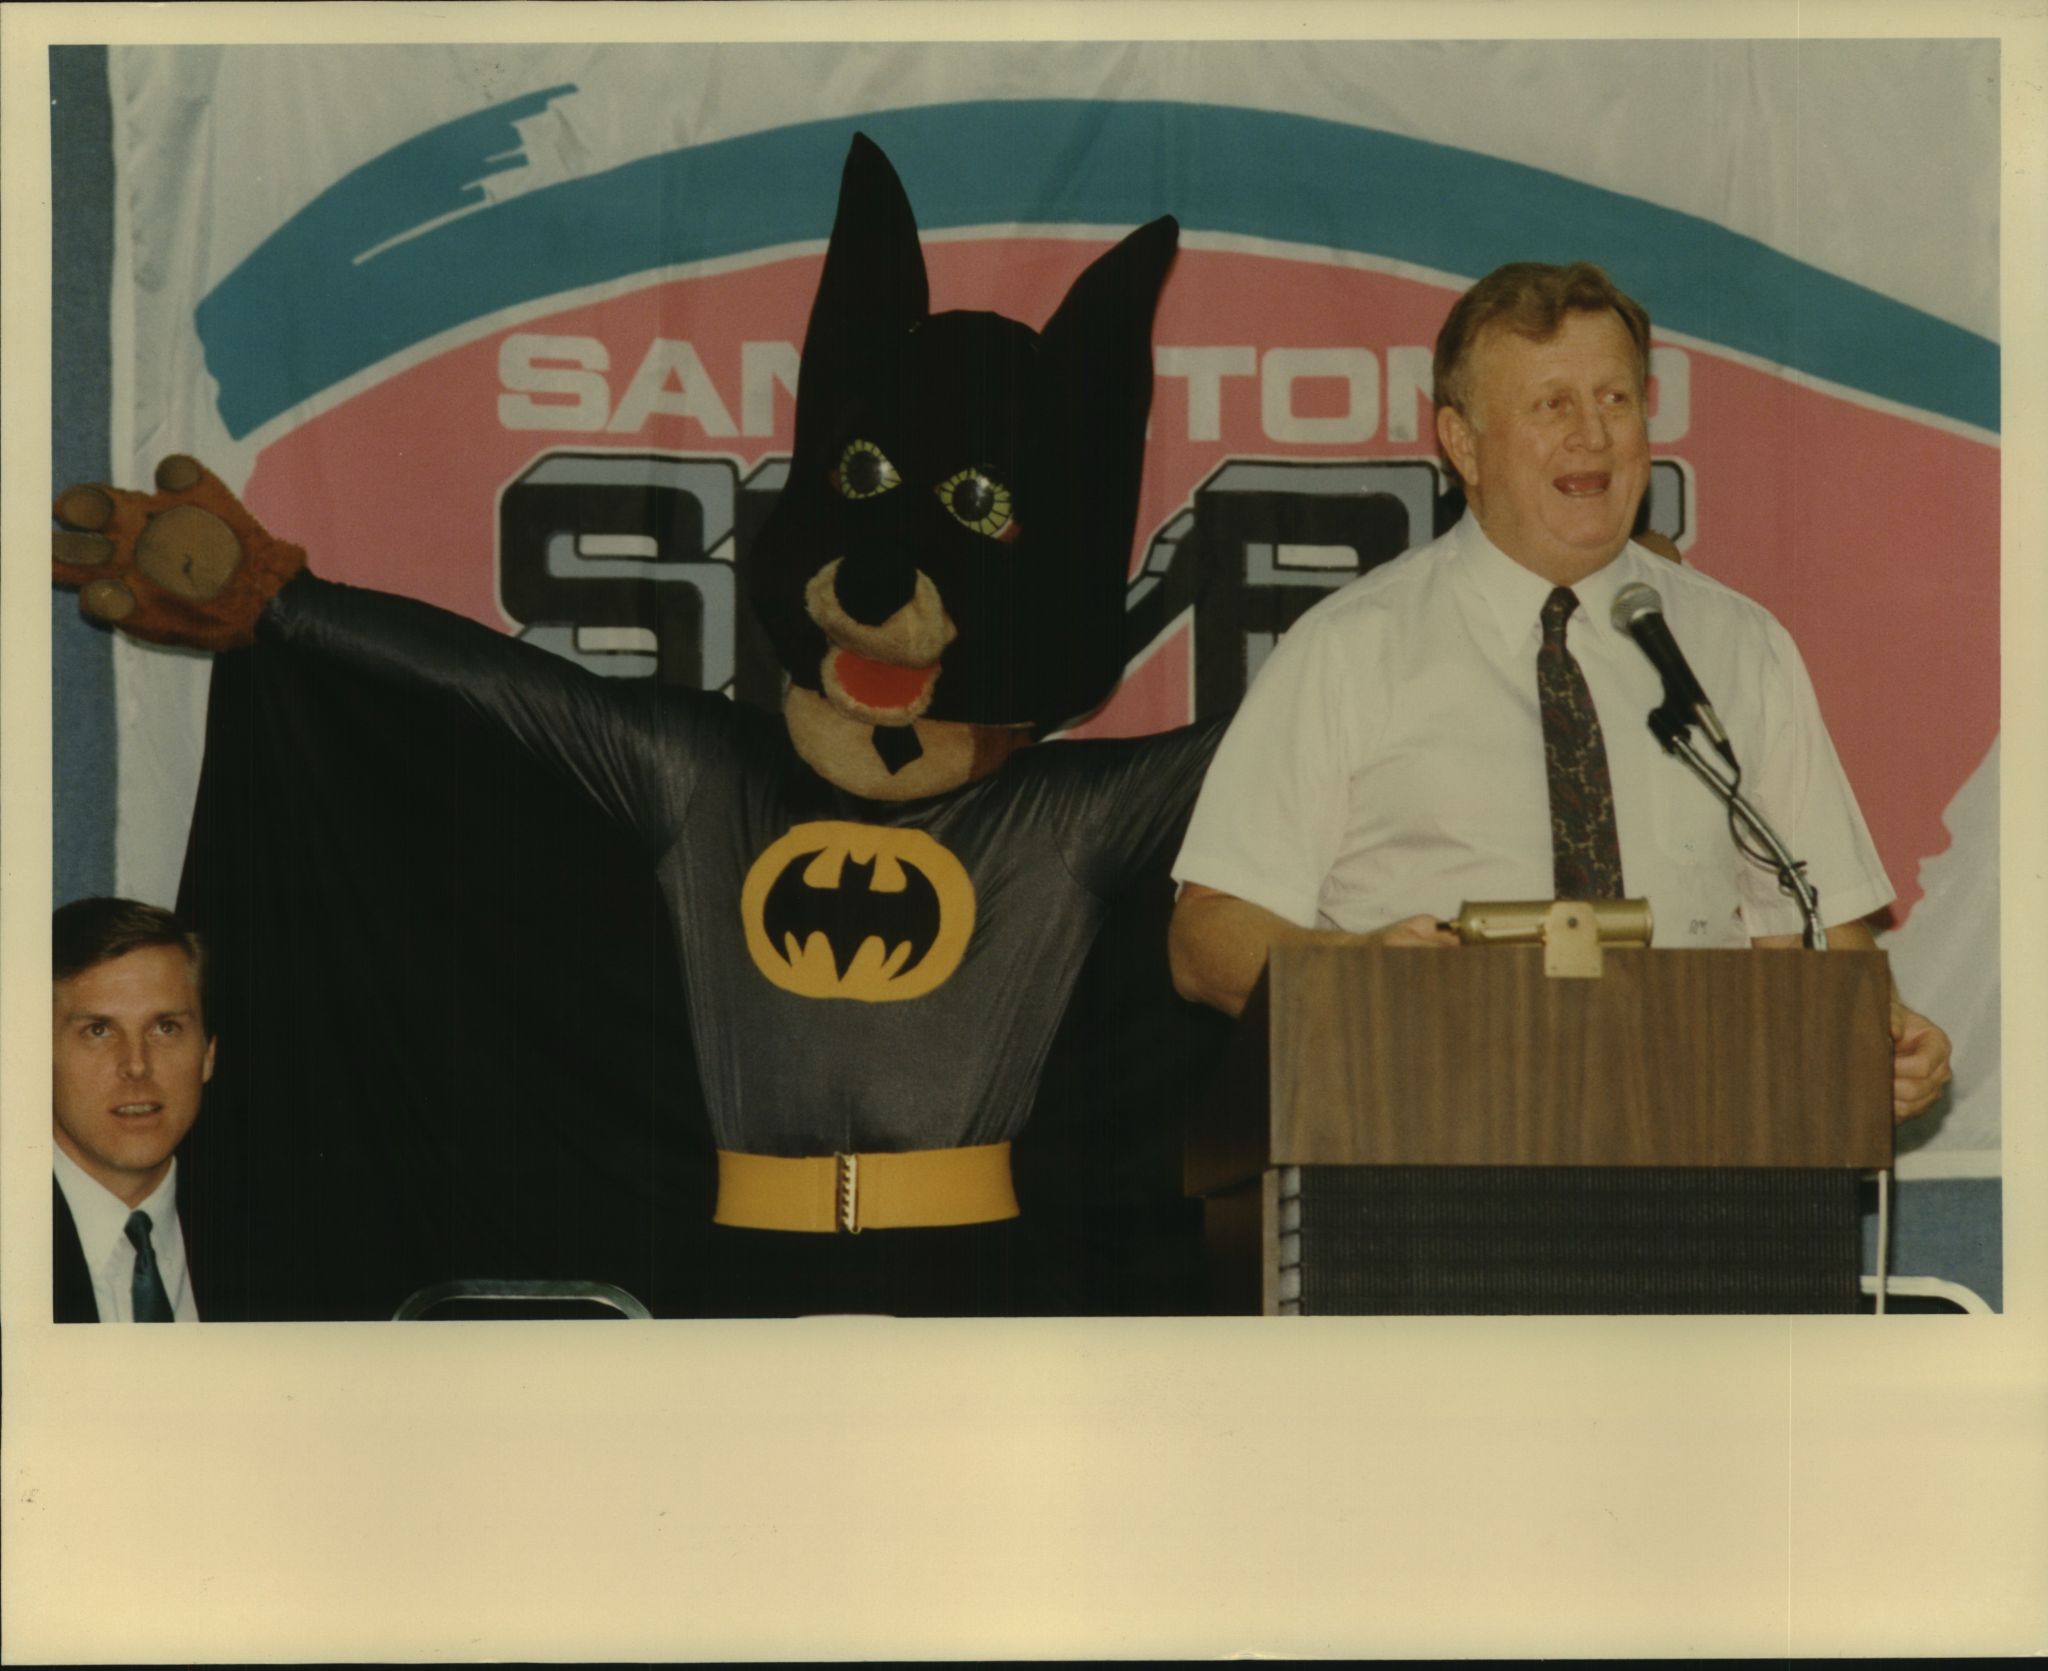 Spurs coyote mascot dressed as Batman nets a real bat - not making this up